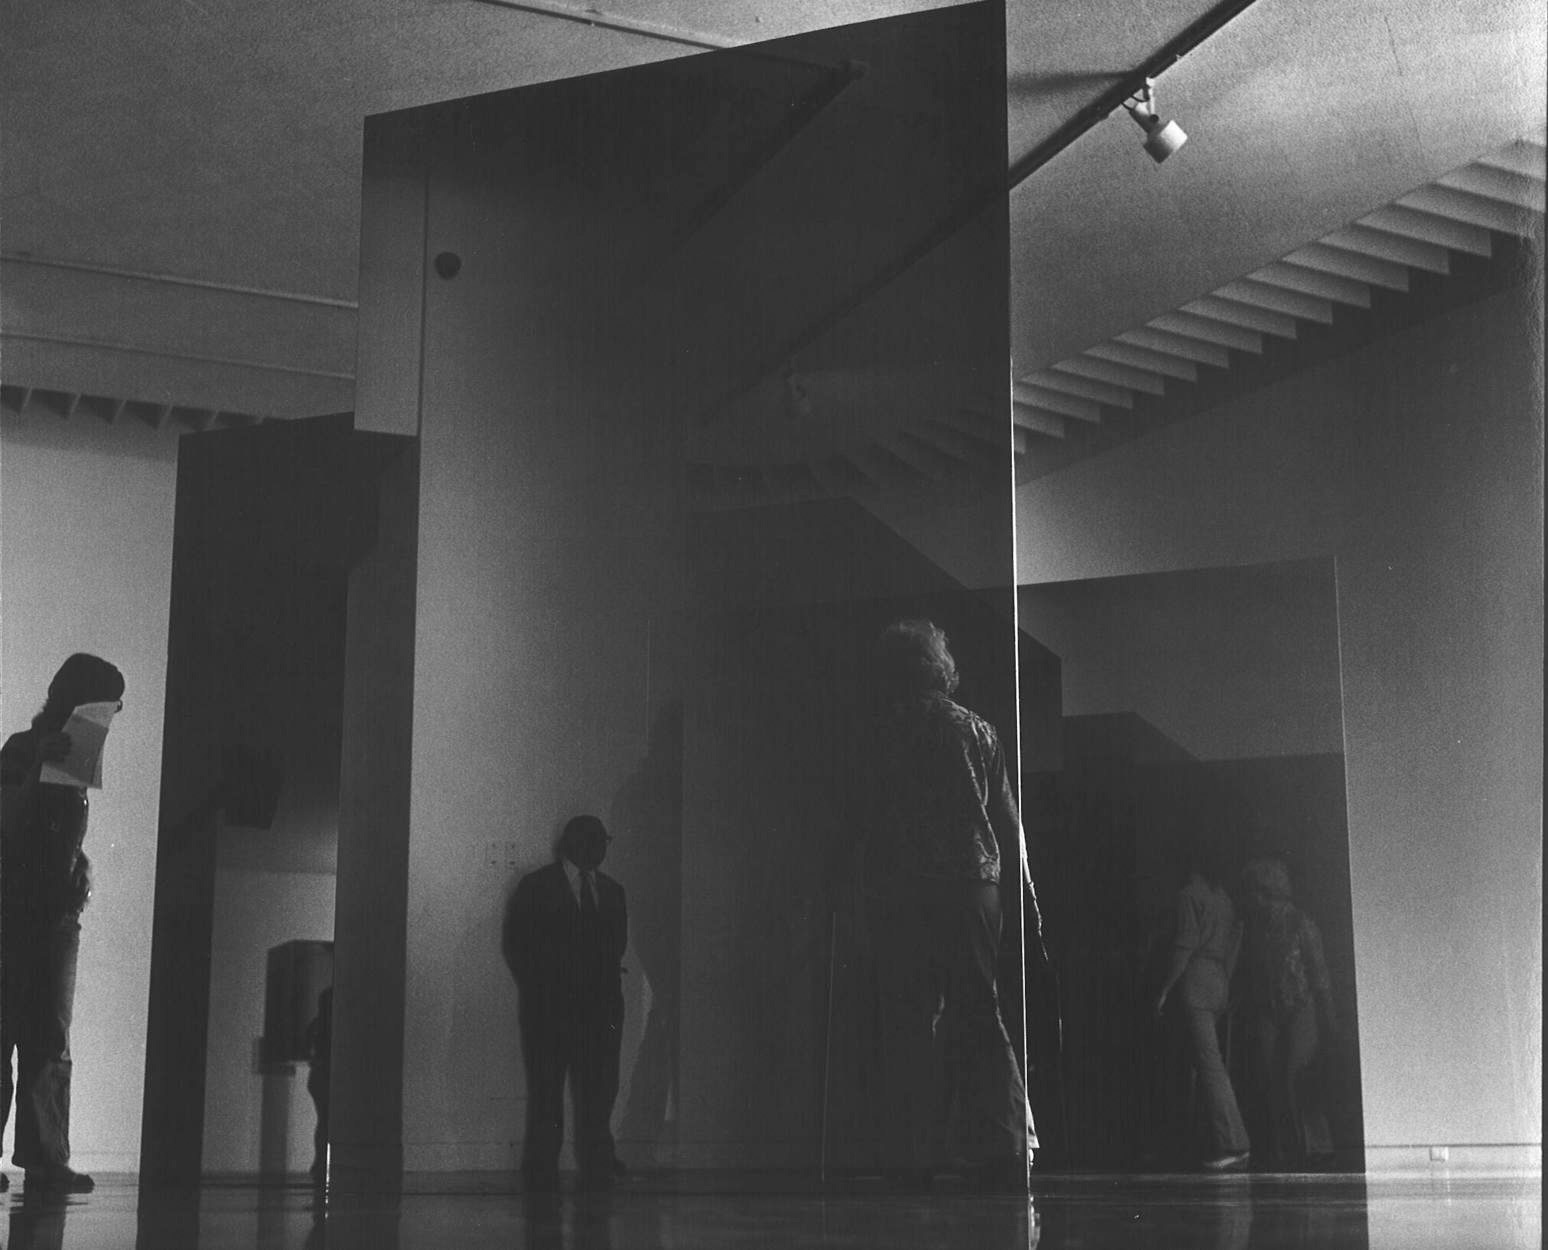 Larry Bell's solo exhibition at the Pasadena Museum of Art, 1972. Photo: Patricia Faure. Courtesy of the estate of Patricia Faure and the Norton Simon Museum Archives.